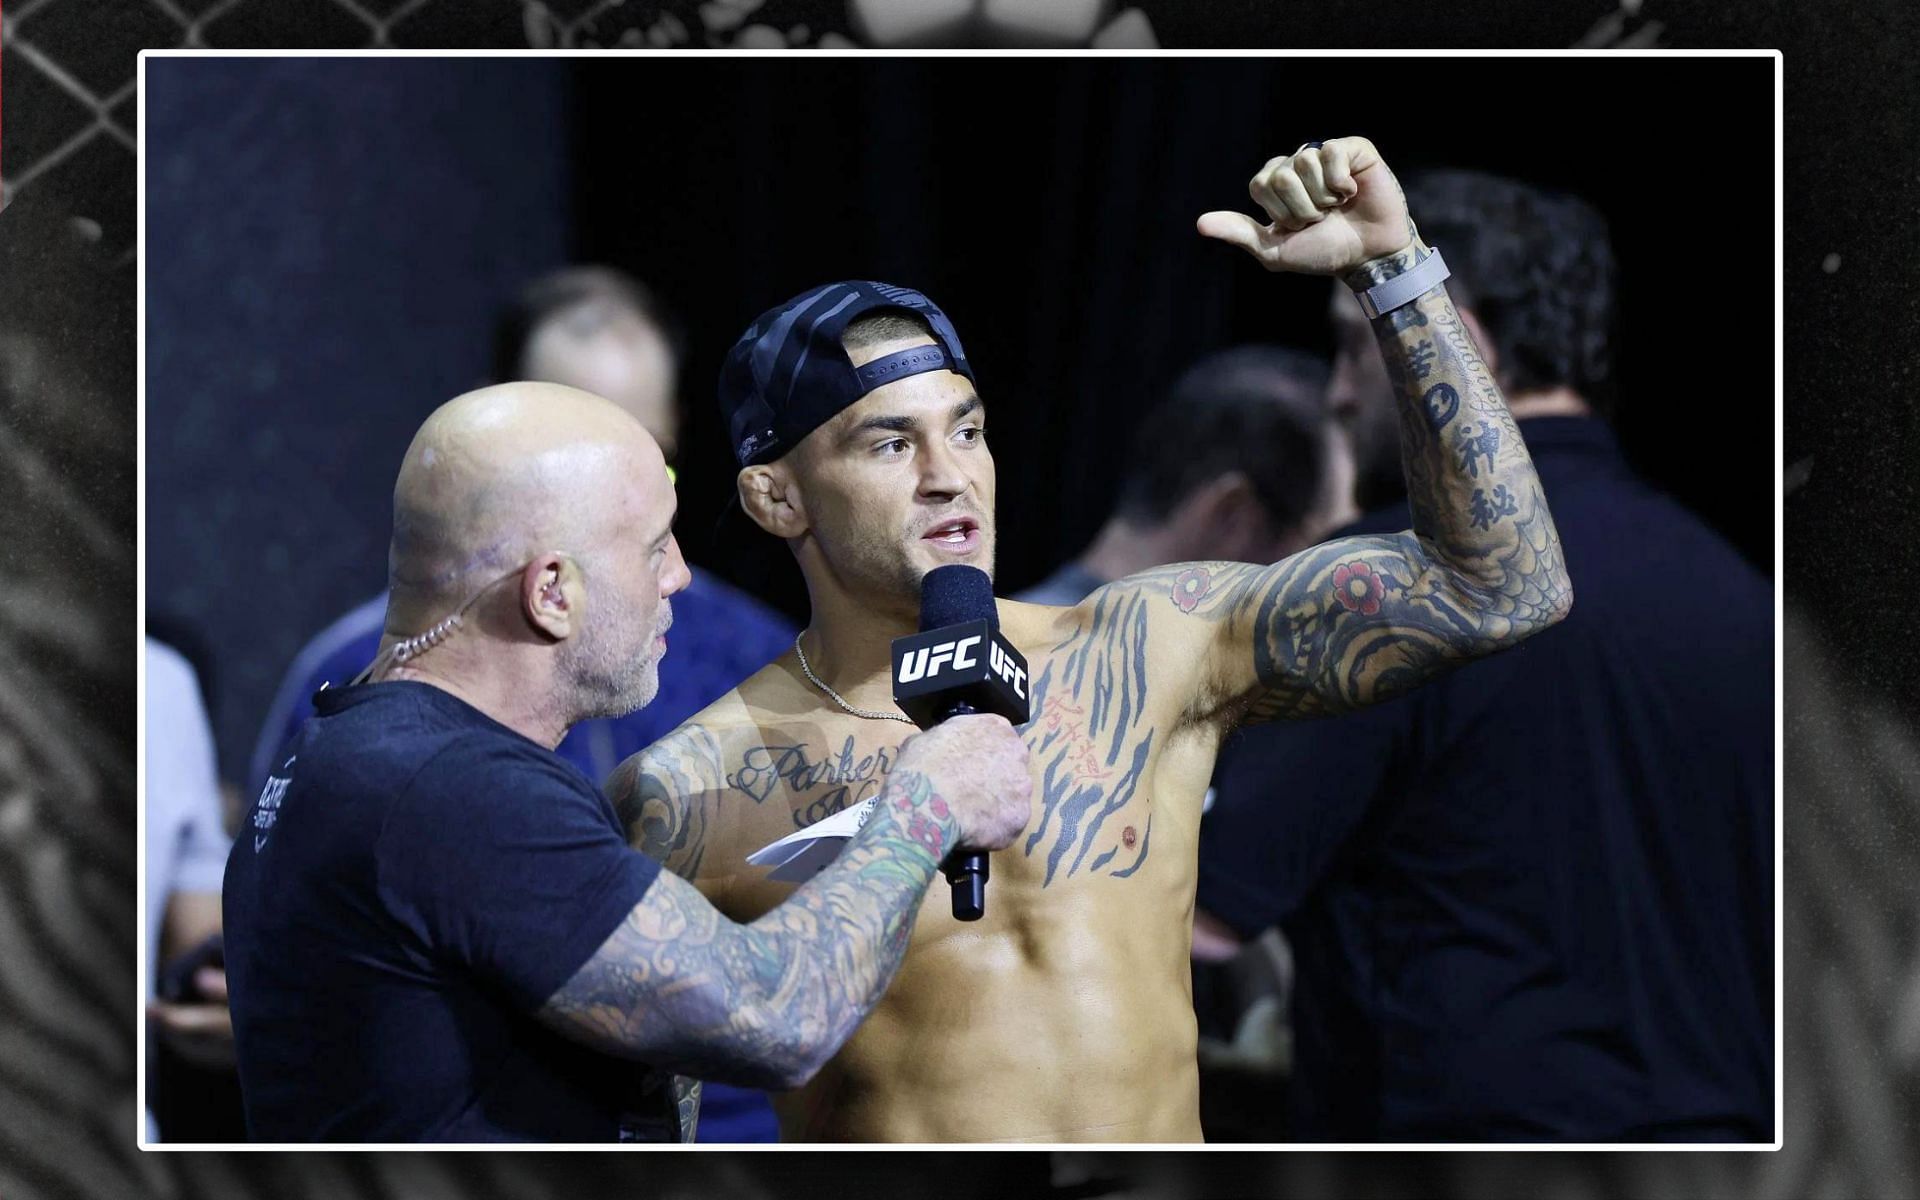 Dustin Poirier clears air amid retirement rumors. [Image courtesy: Getty Images]